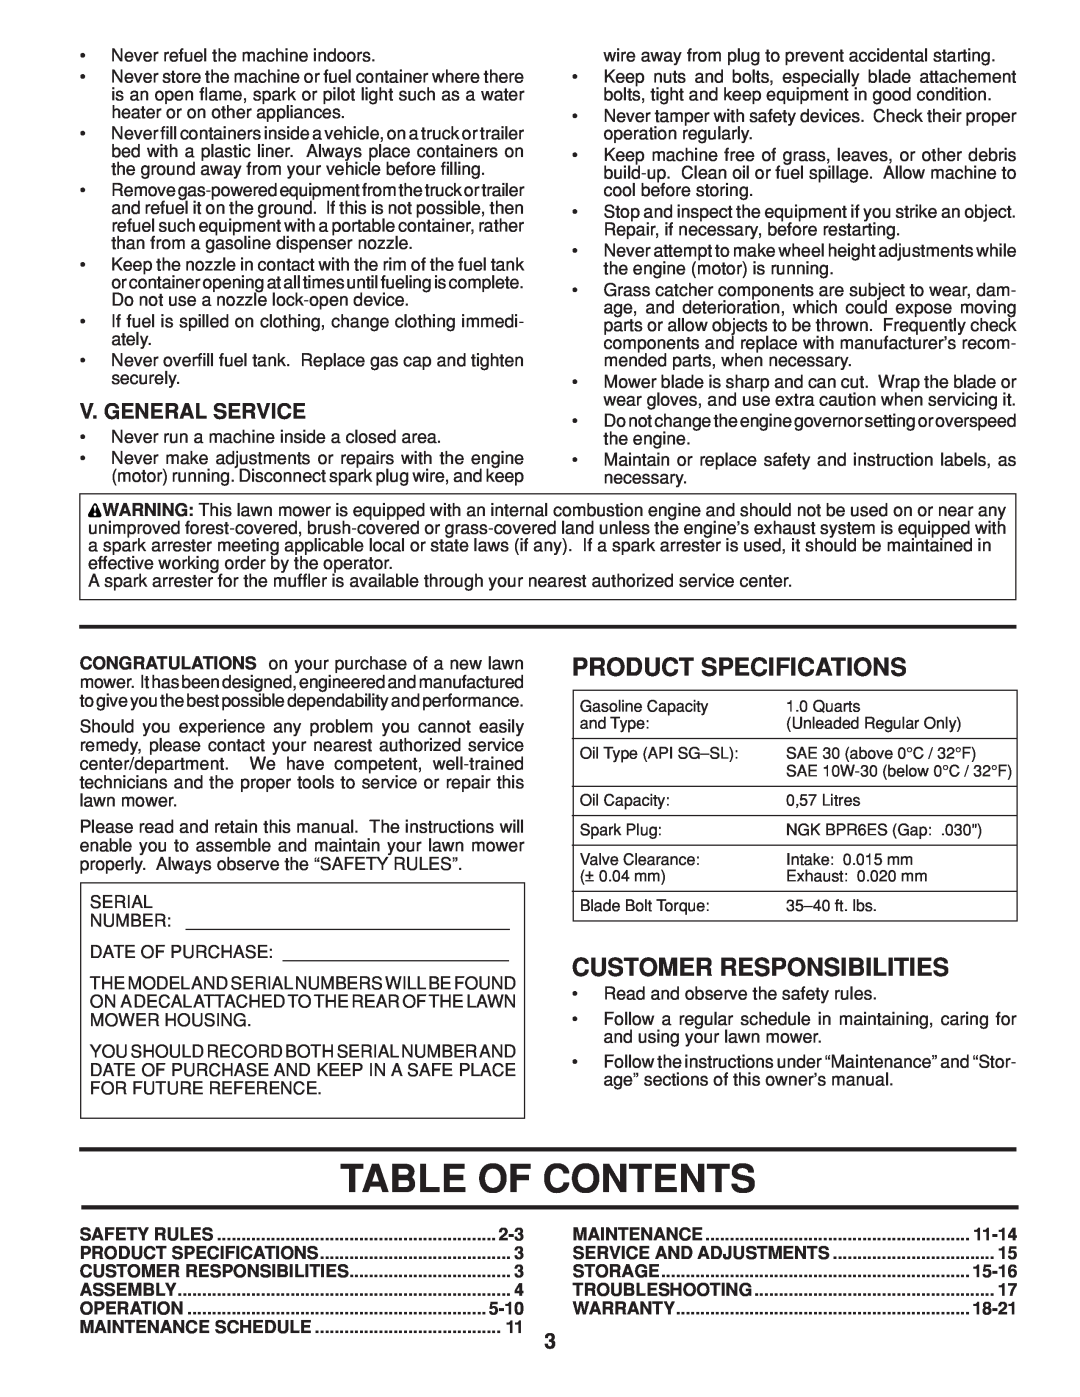 Husqvarna HU800BBC manual Table Of Contents, Product Specifications, Customer Responsibilities, V. General Service 